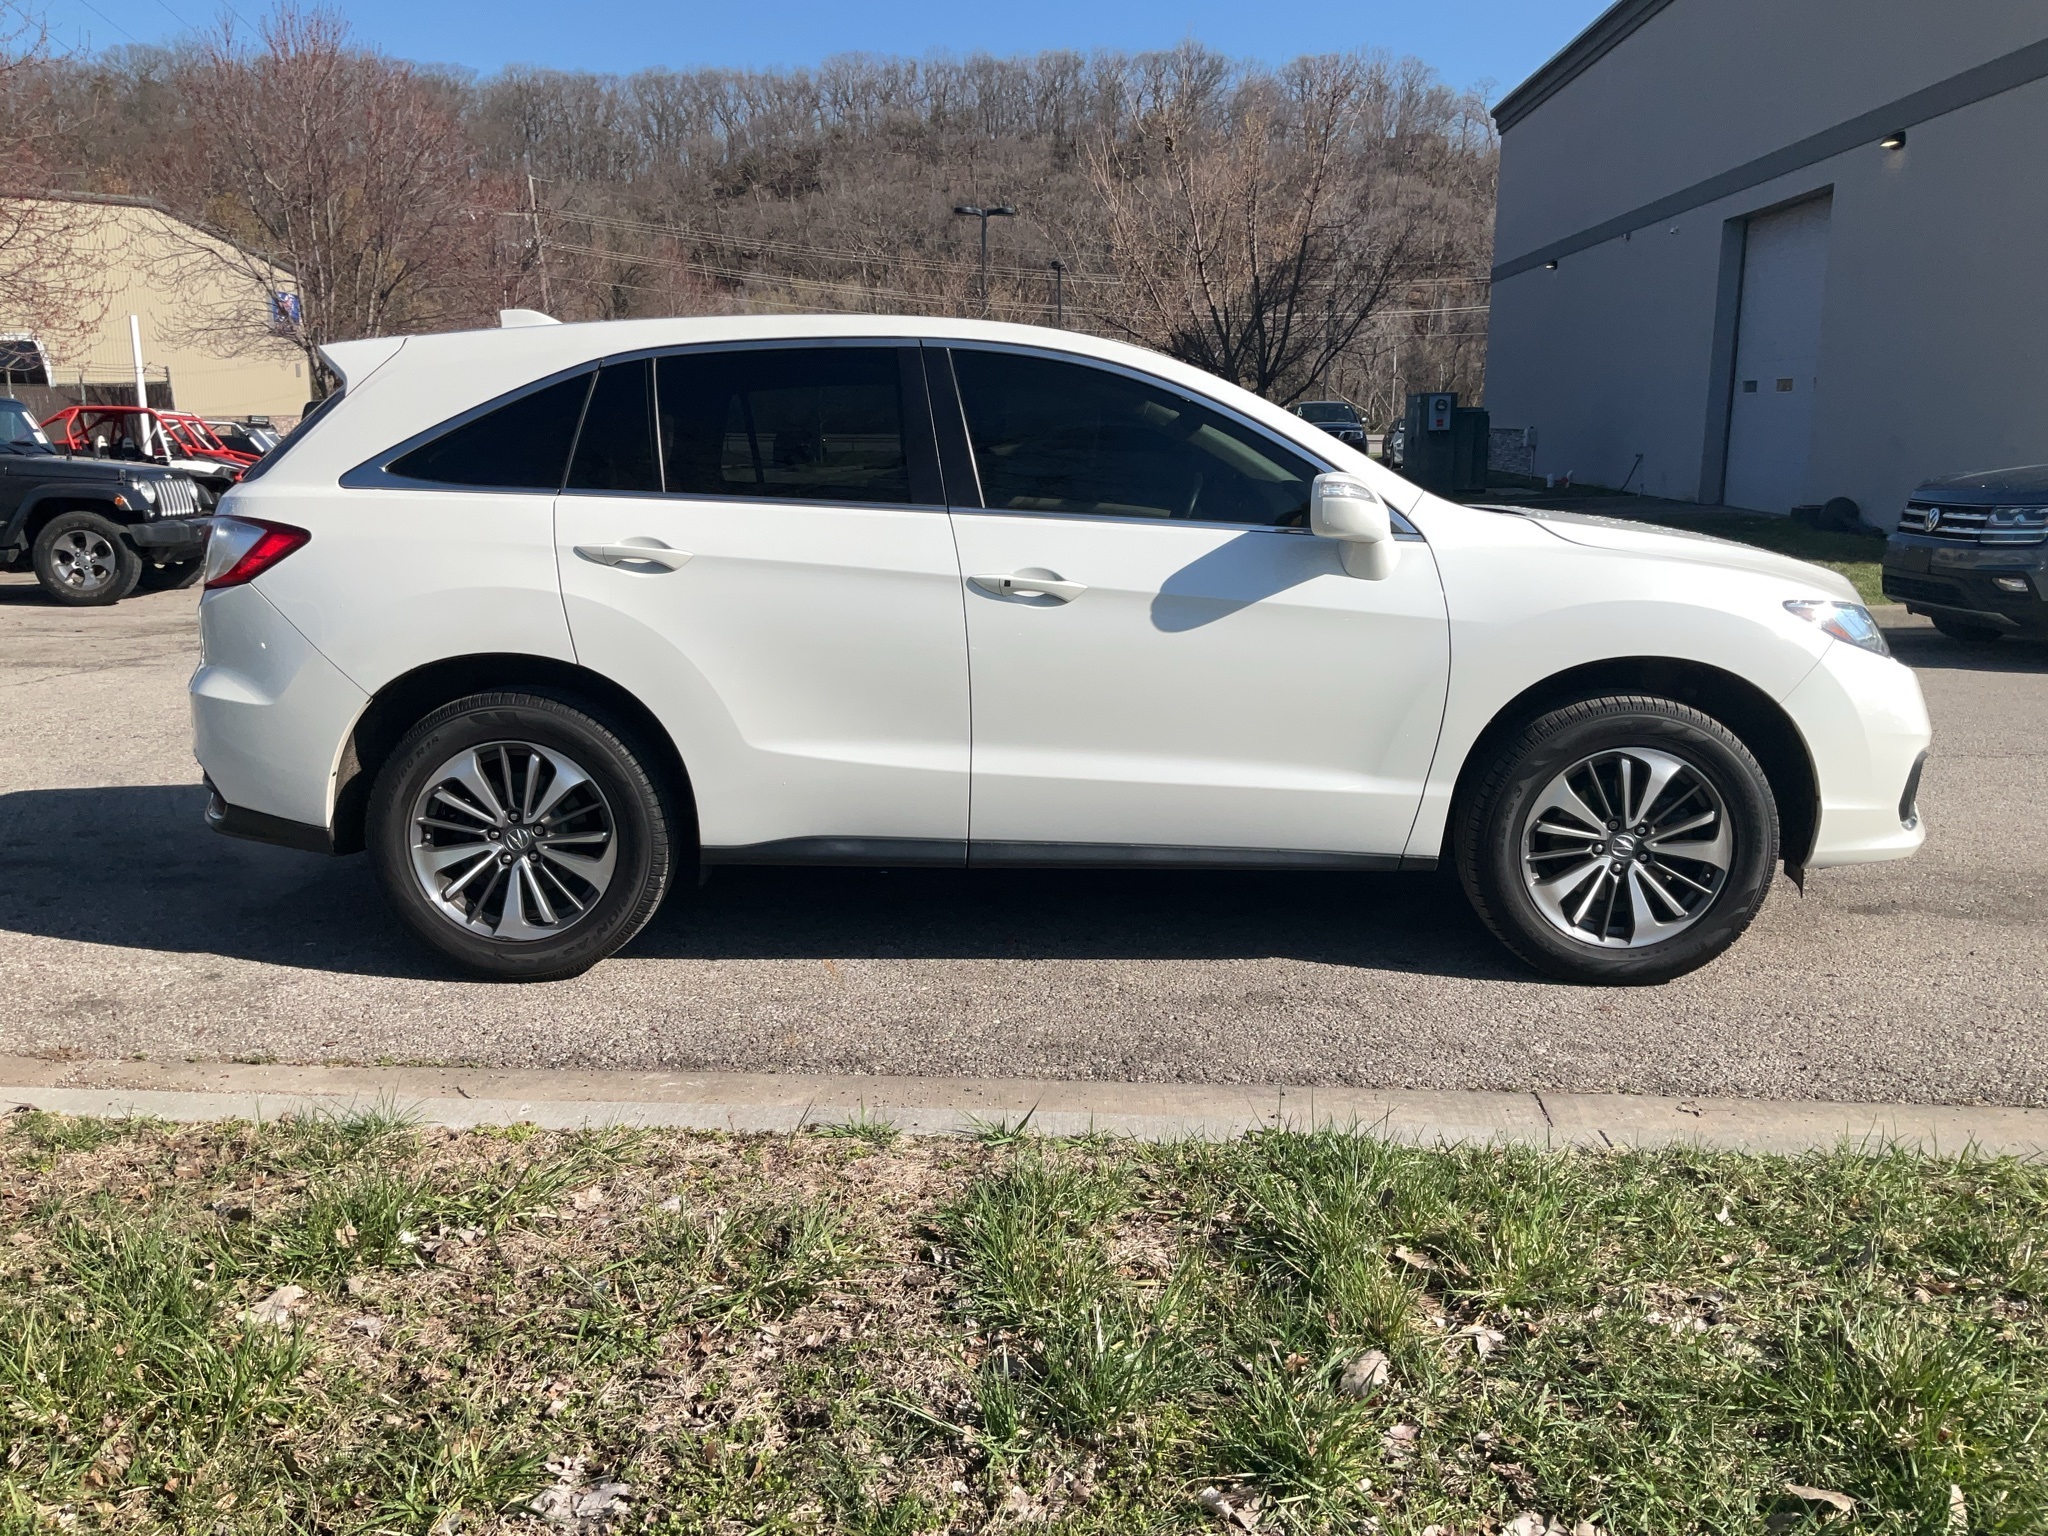 2018 Acura RDX Advance Package 4